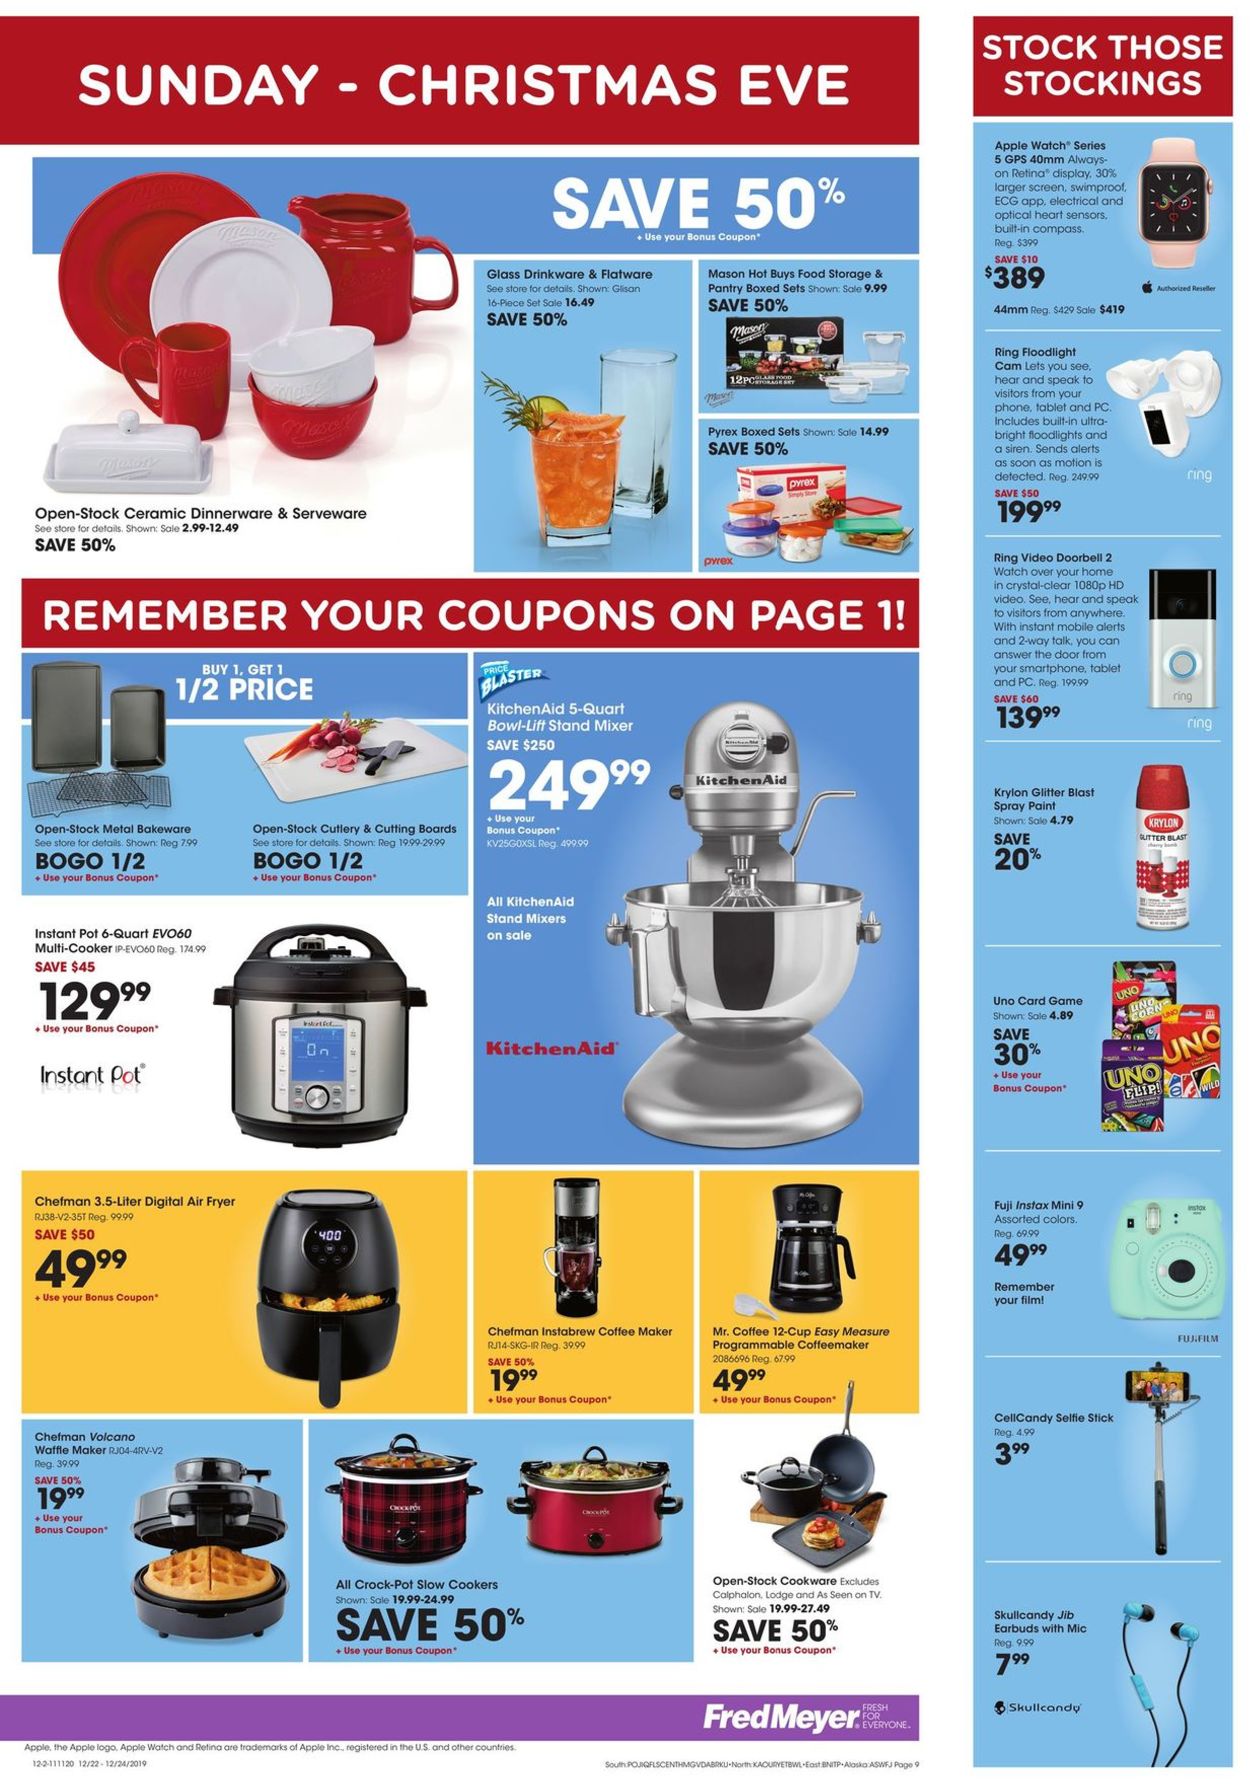 Fred Meyer - Christmas Sale Ad 2019 Weekly Ad Circular - valid 12/22-12/24/2019 (Page 9)